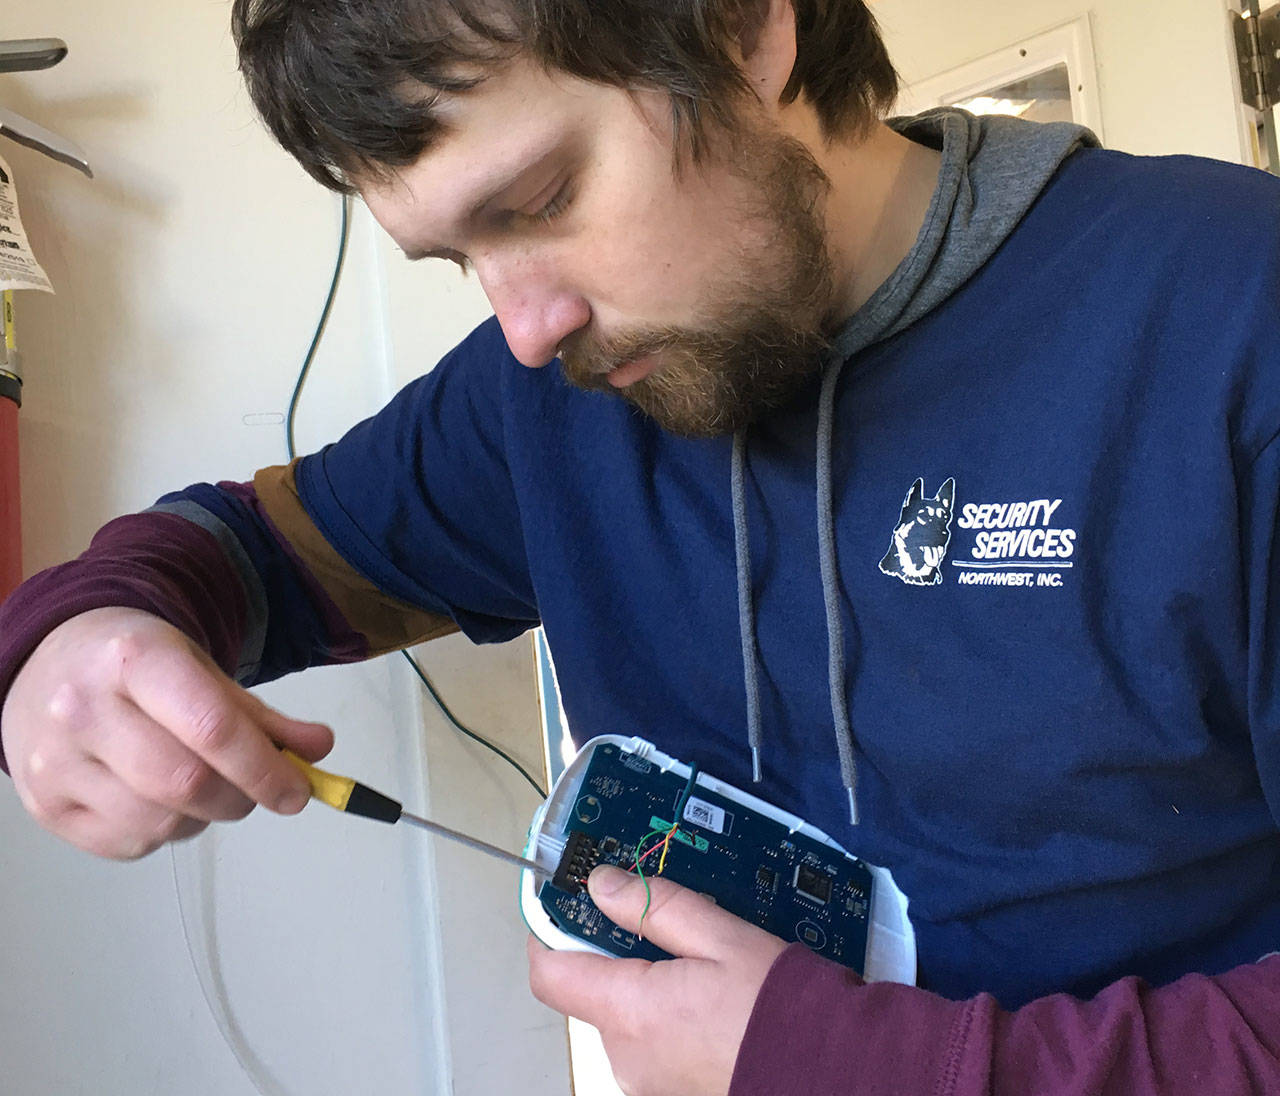 Sevi Kovach, a security system technician with Security Services Northwest, works to install a system donated to the Sequim Food Bank. Photo courtesy of Security Services Northwest, Inc.